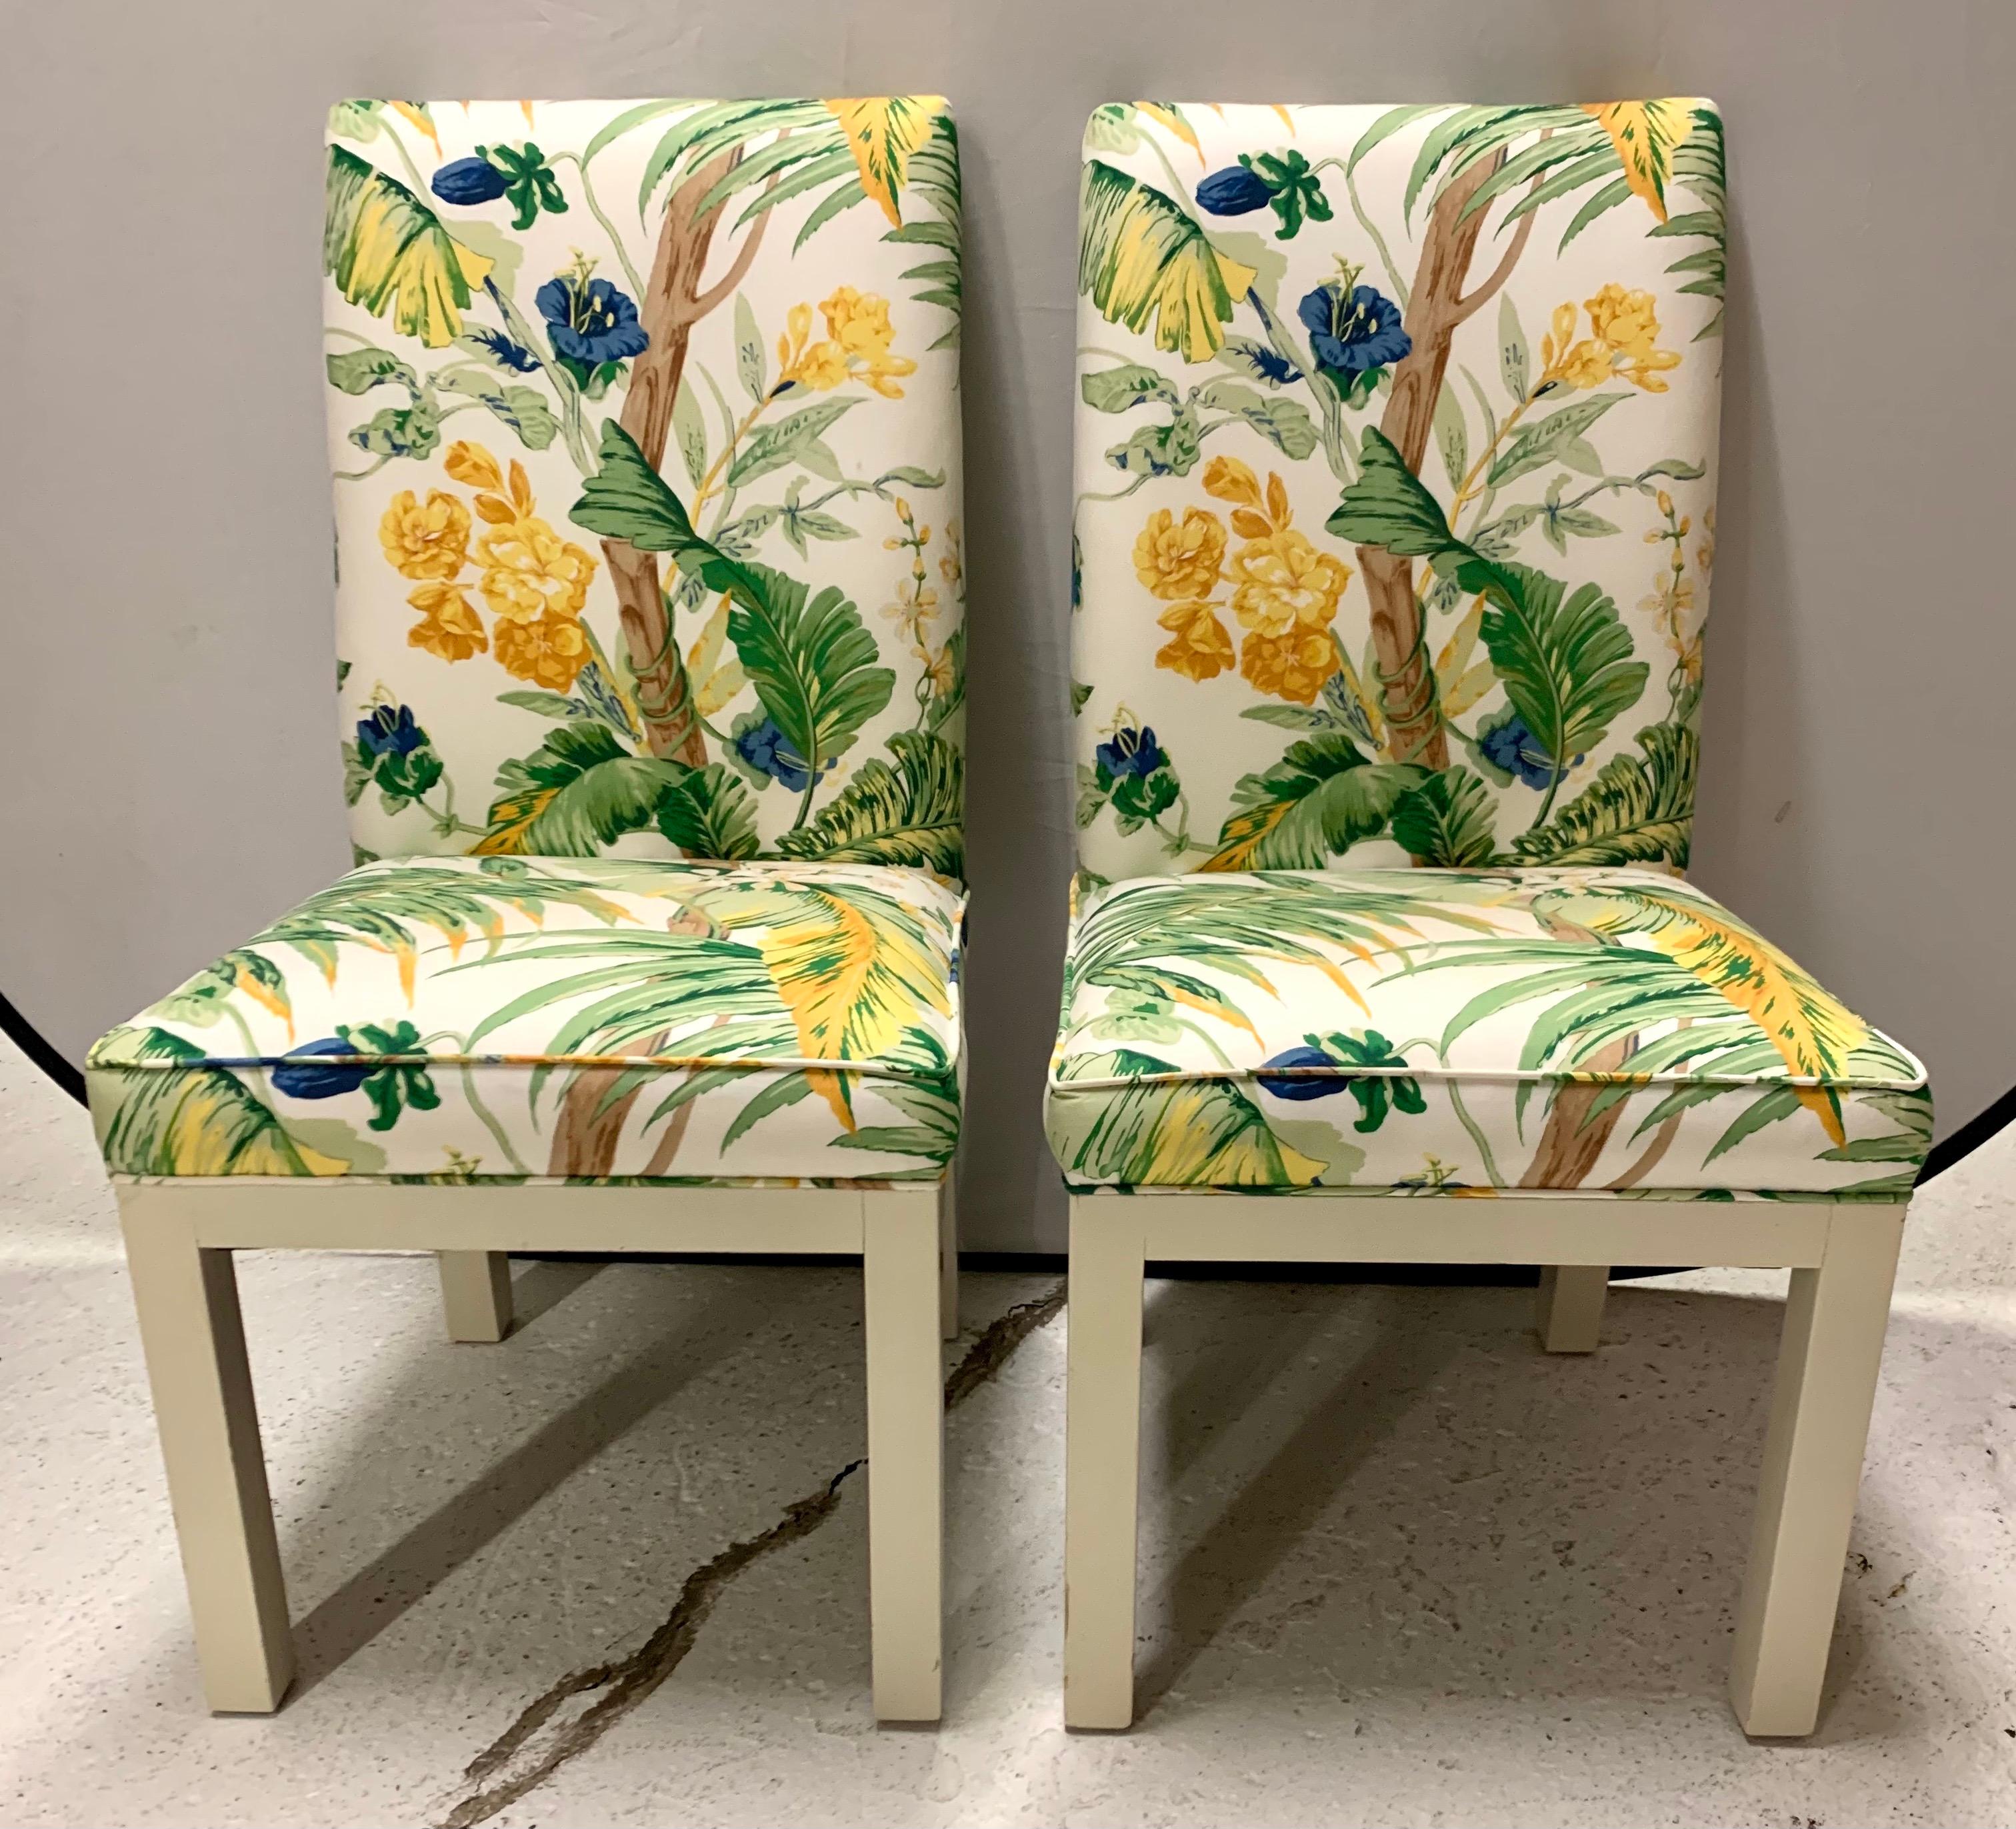 Fabulous set of four 1970's slipper chairs redone in a vibrant and gorgeous Lilly Pulitzer Lee Jofa fabric. The chairs scream 